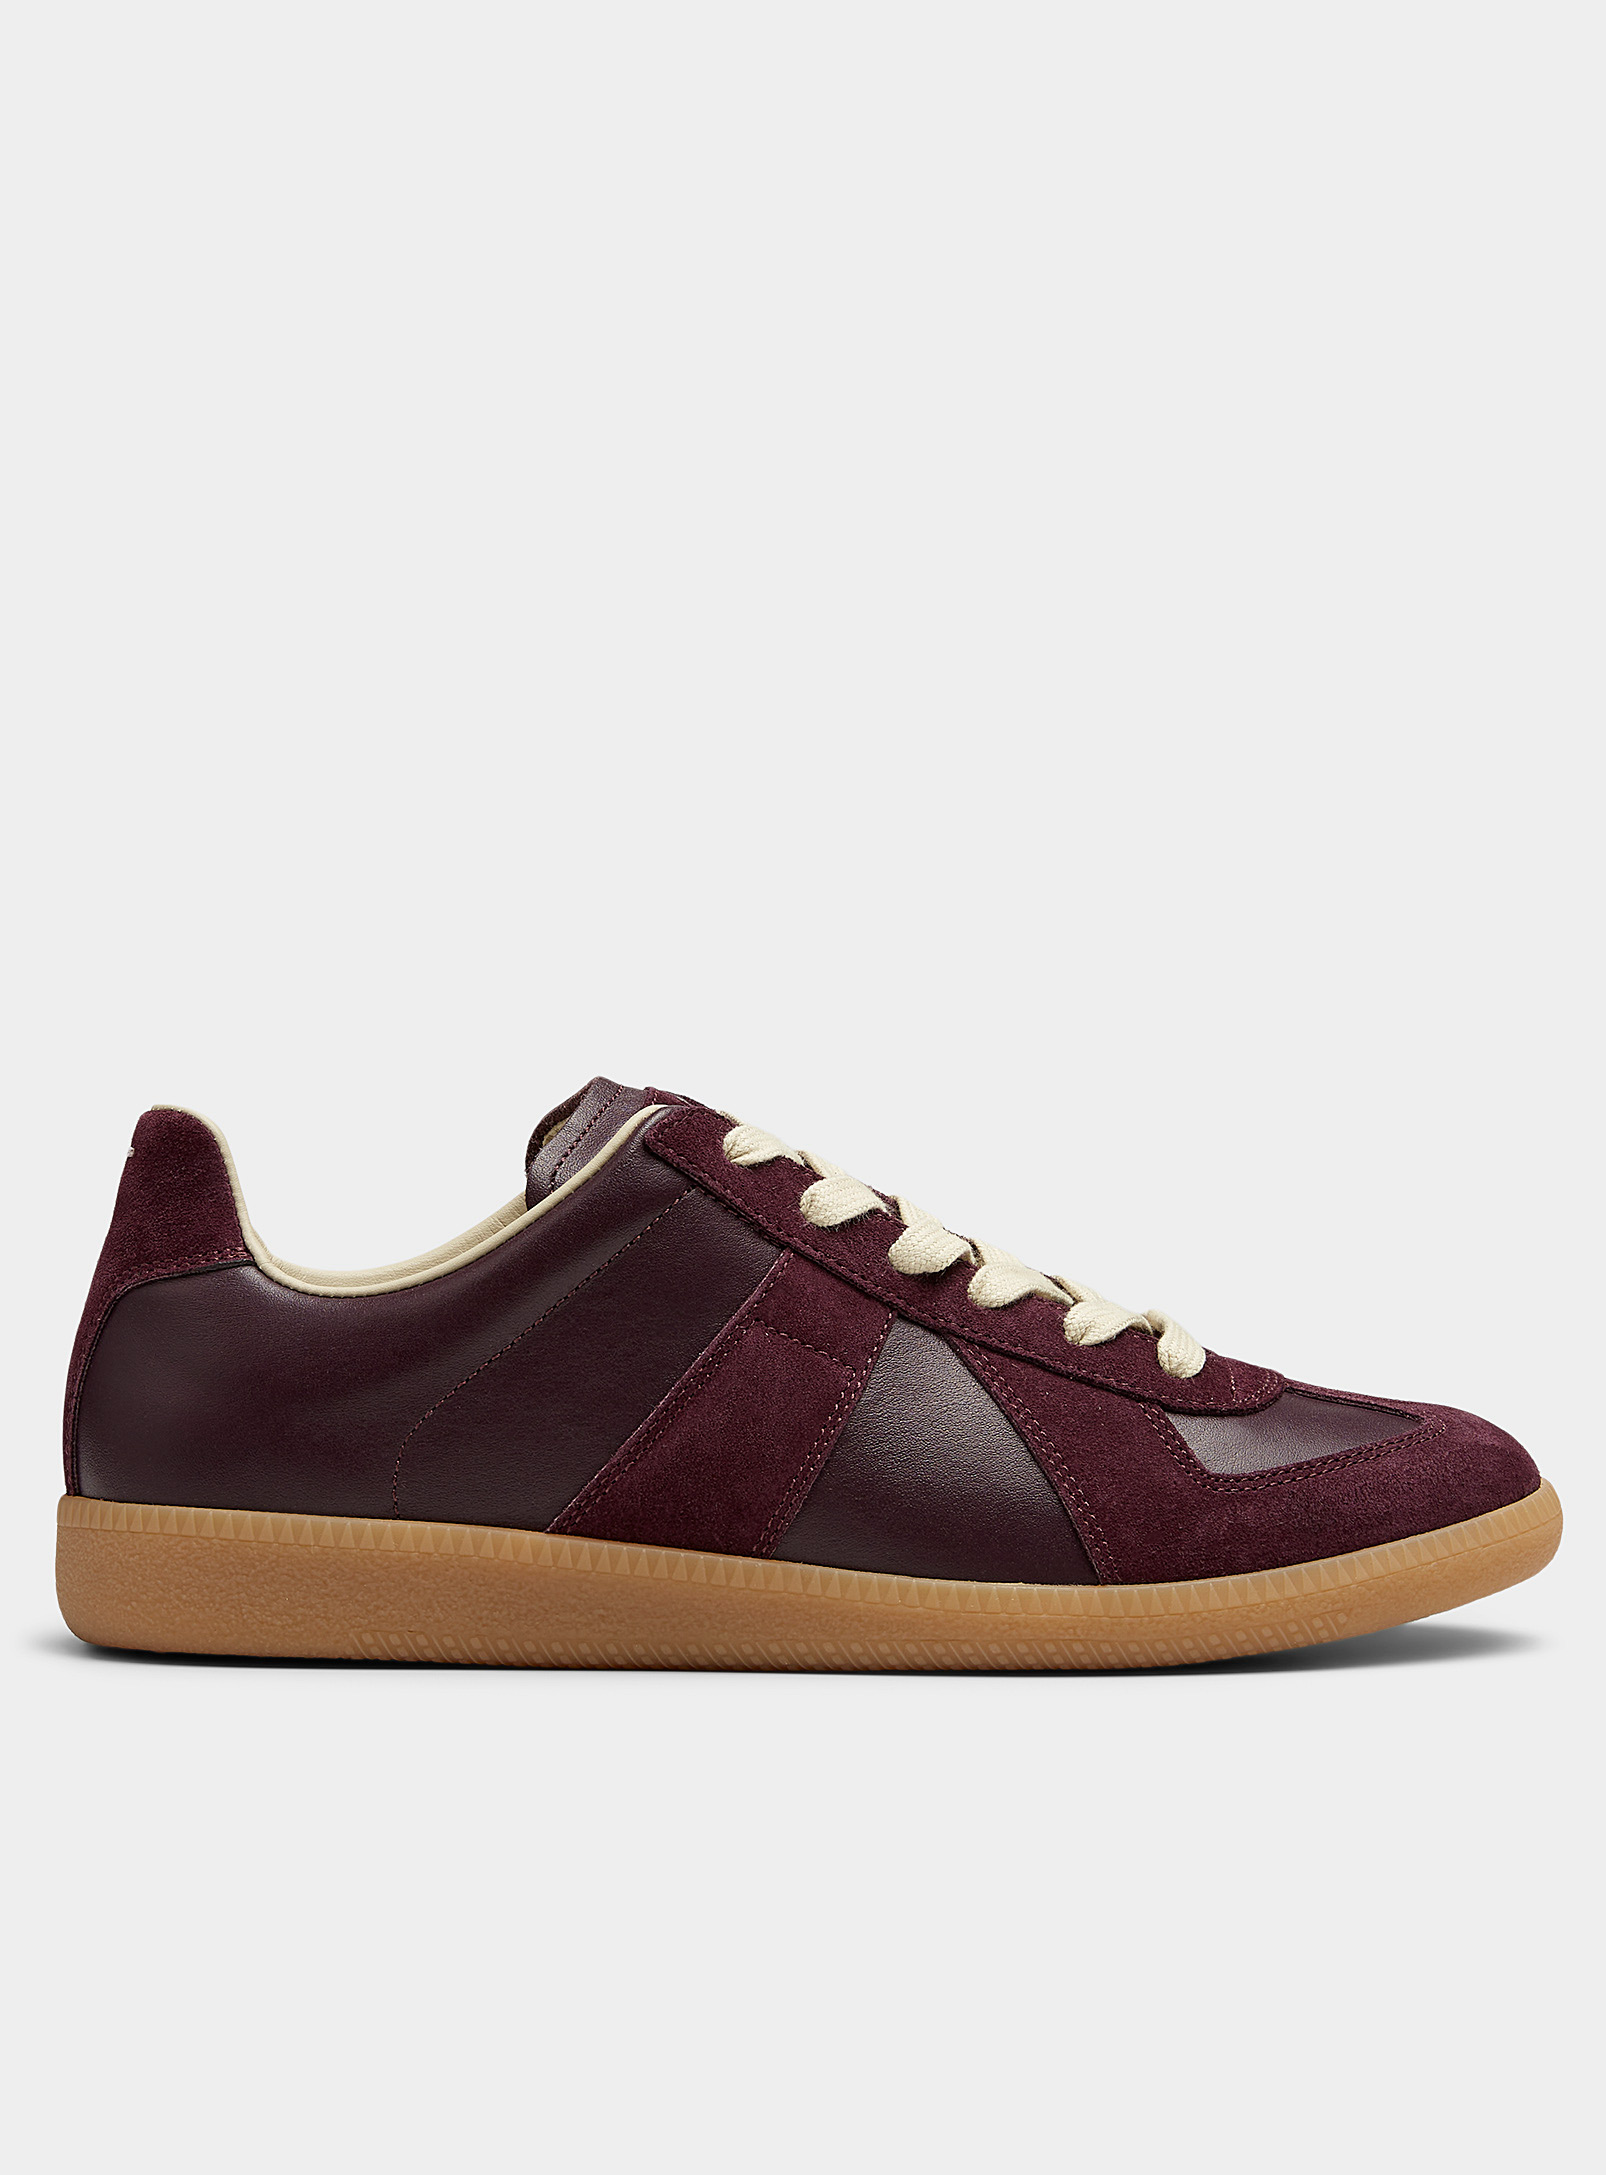 Maison Margiela Replica Leather And Suede Sneakers In Burgundy